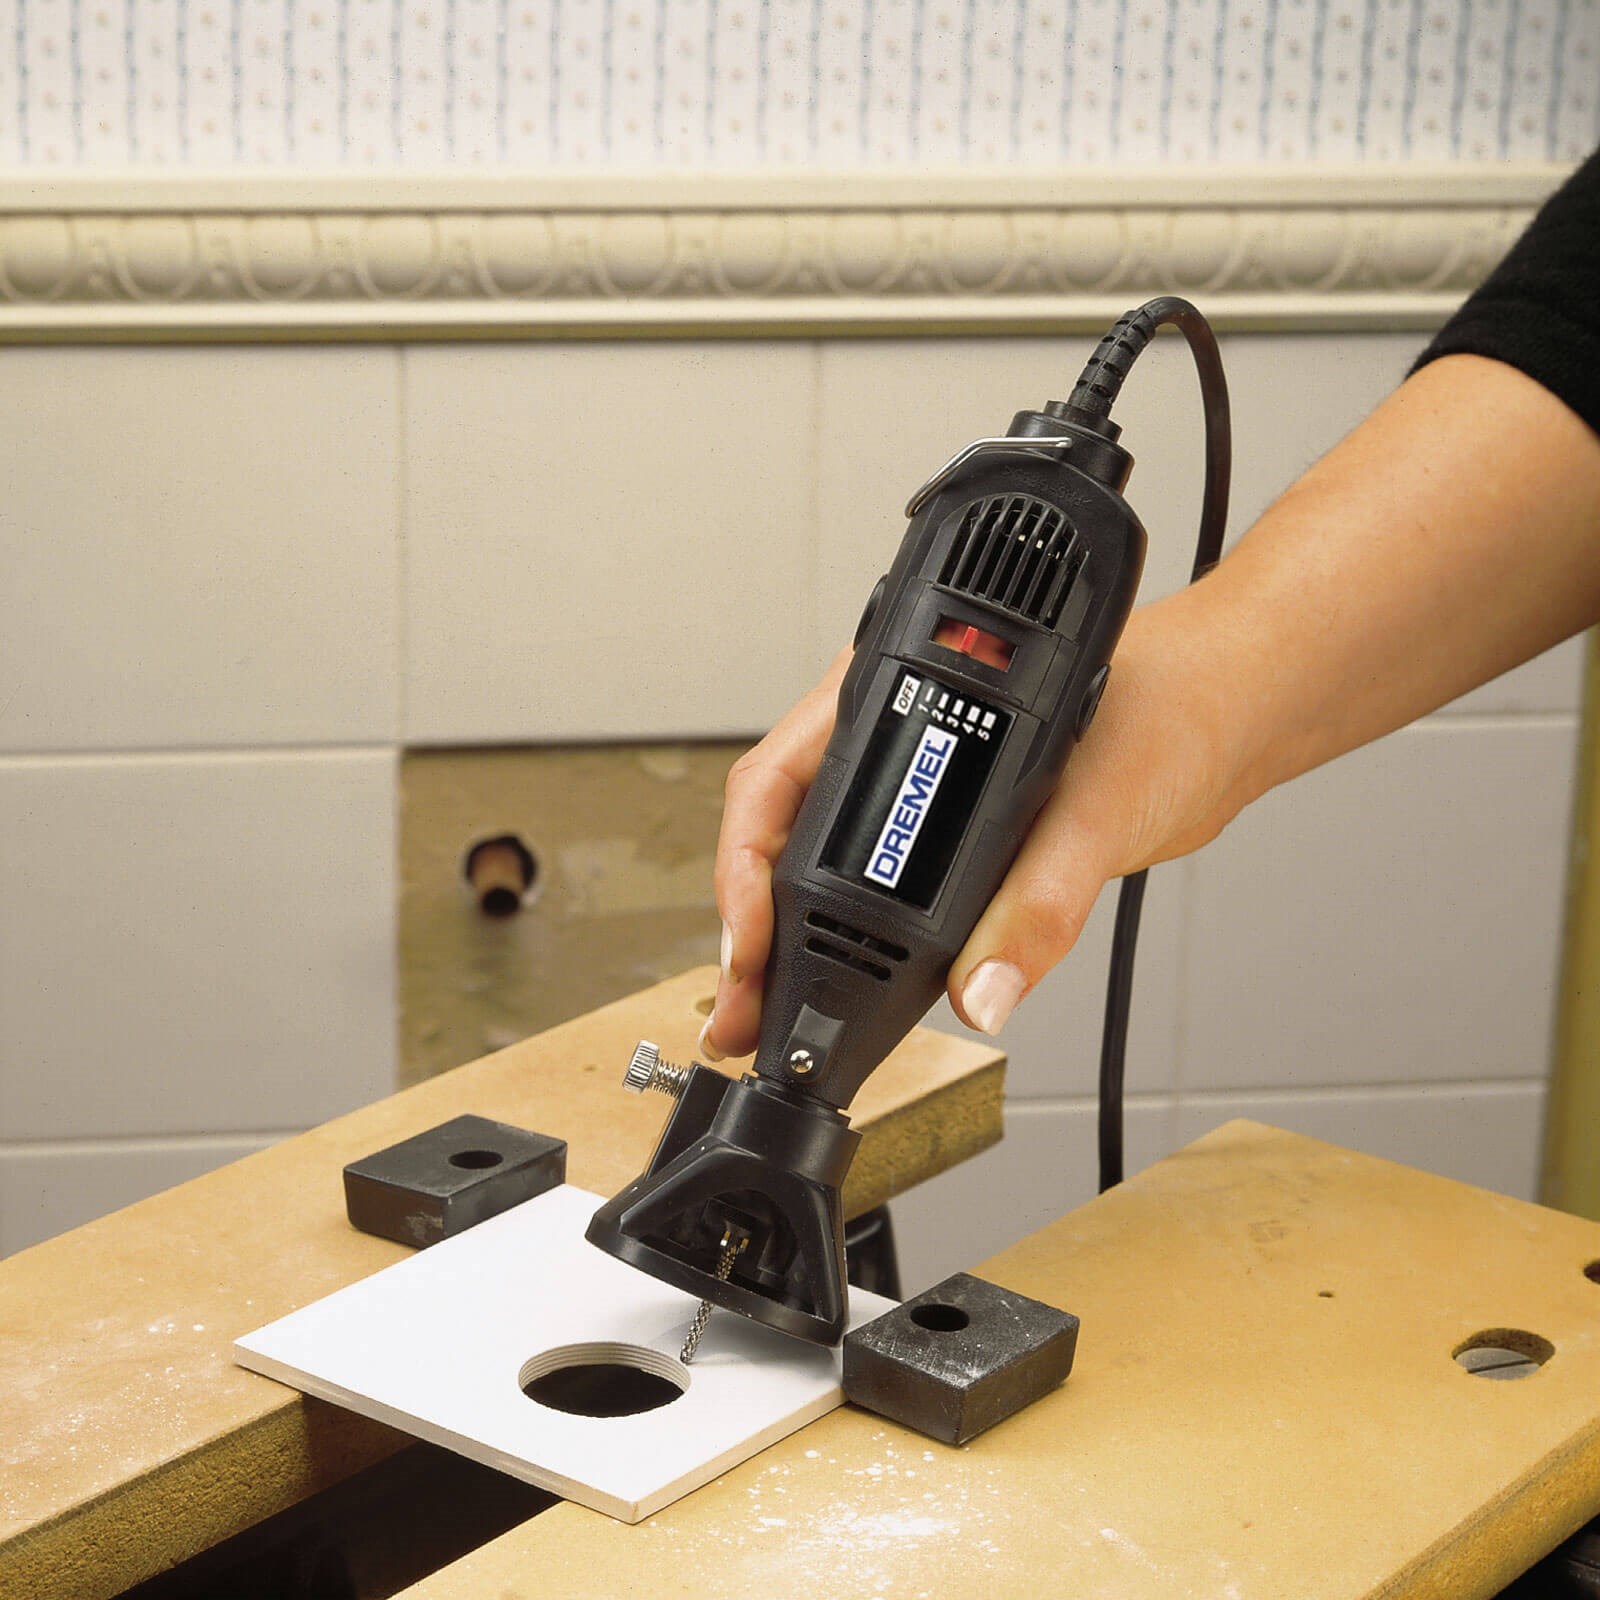 DREMEL® Wall Tile Cutting Kit Attachments to Cut